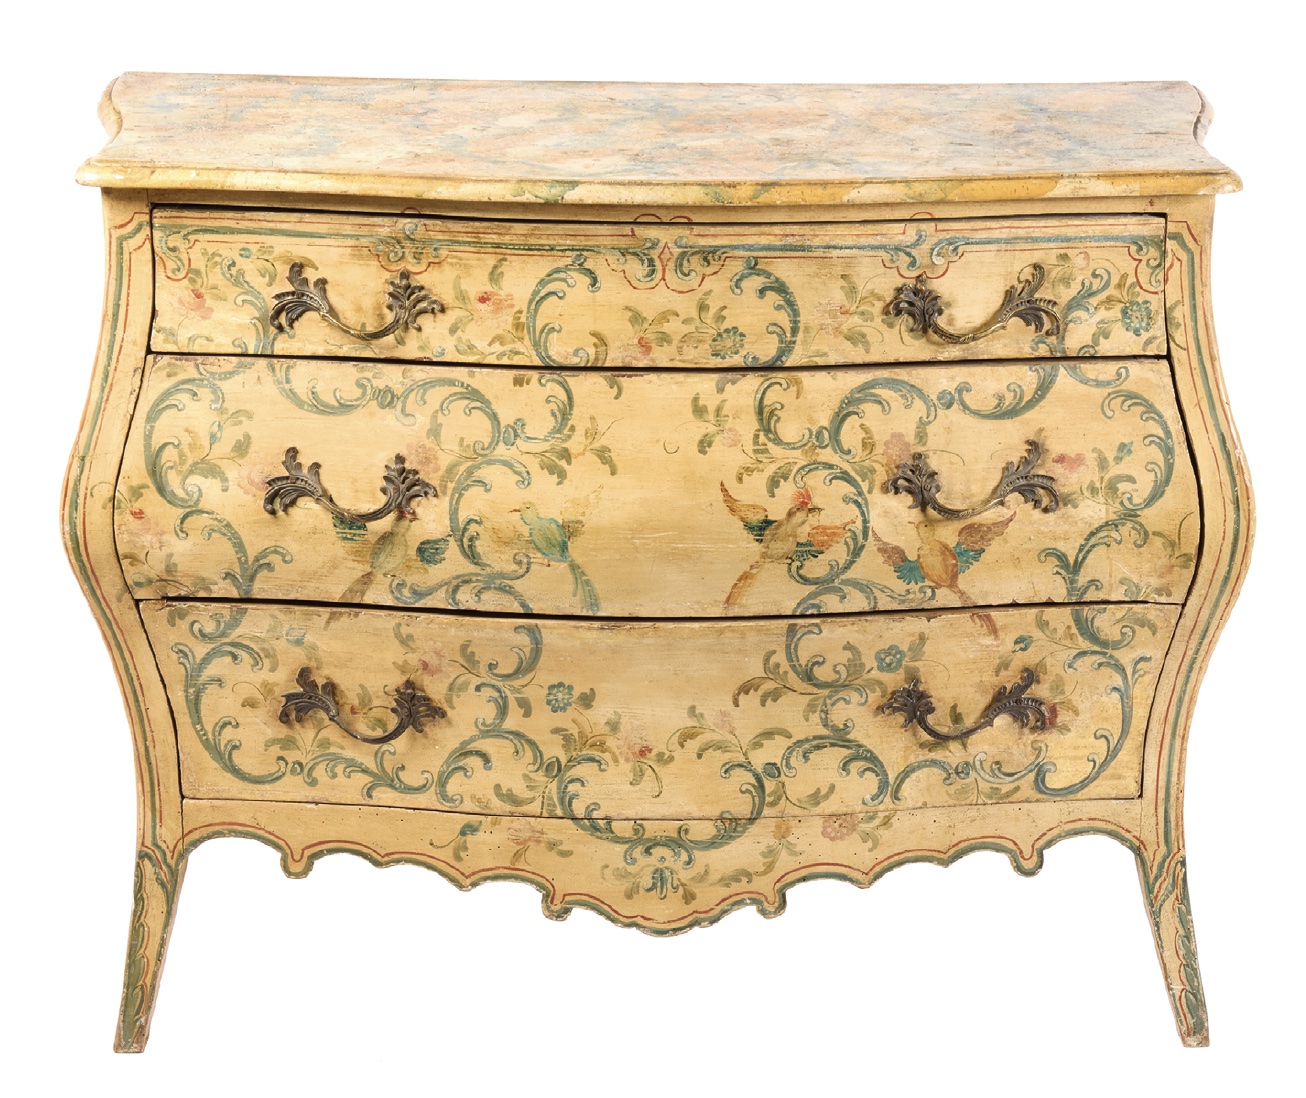 19th-century Italian commode decorated in the 18th-century rococo style